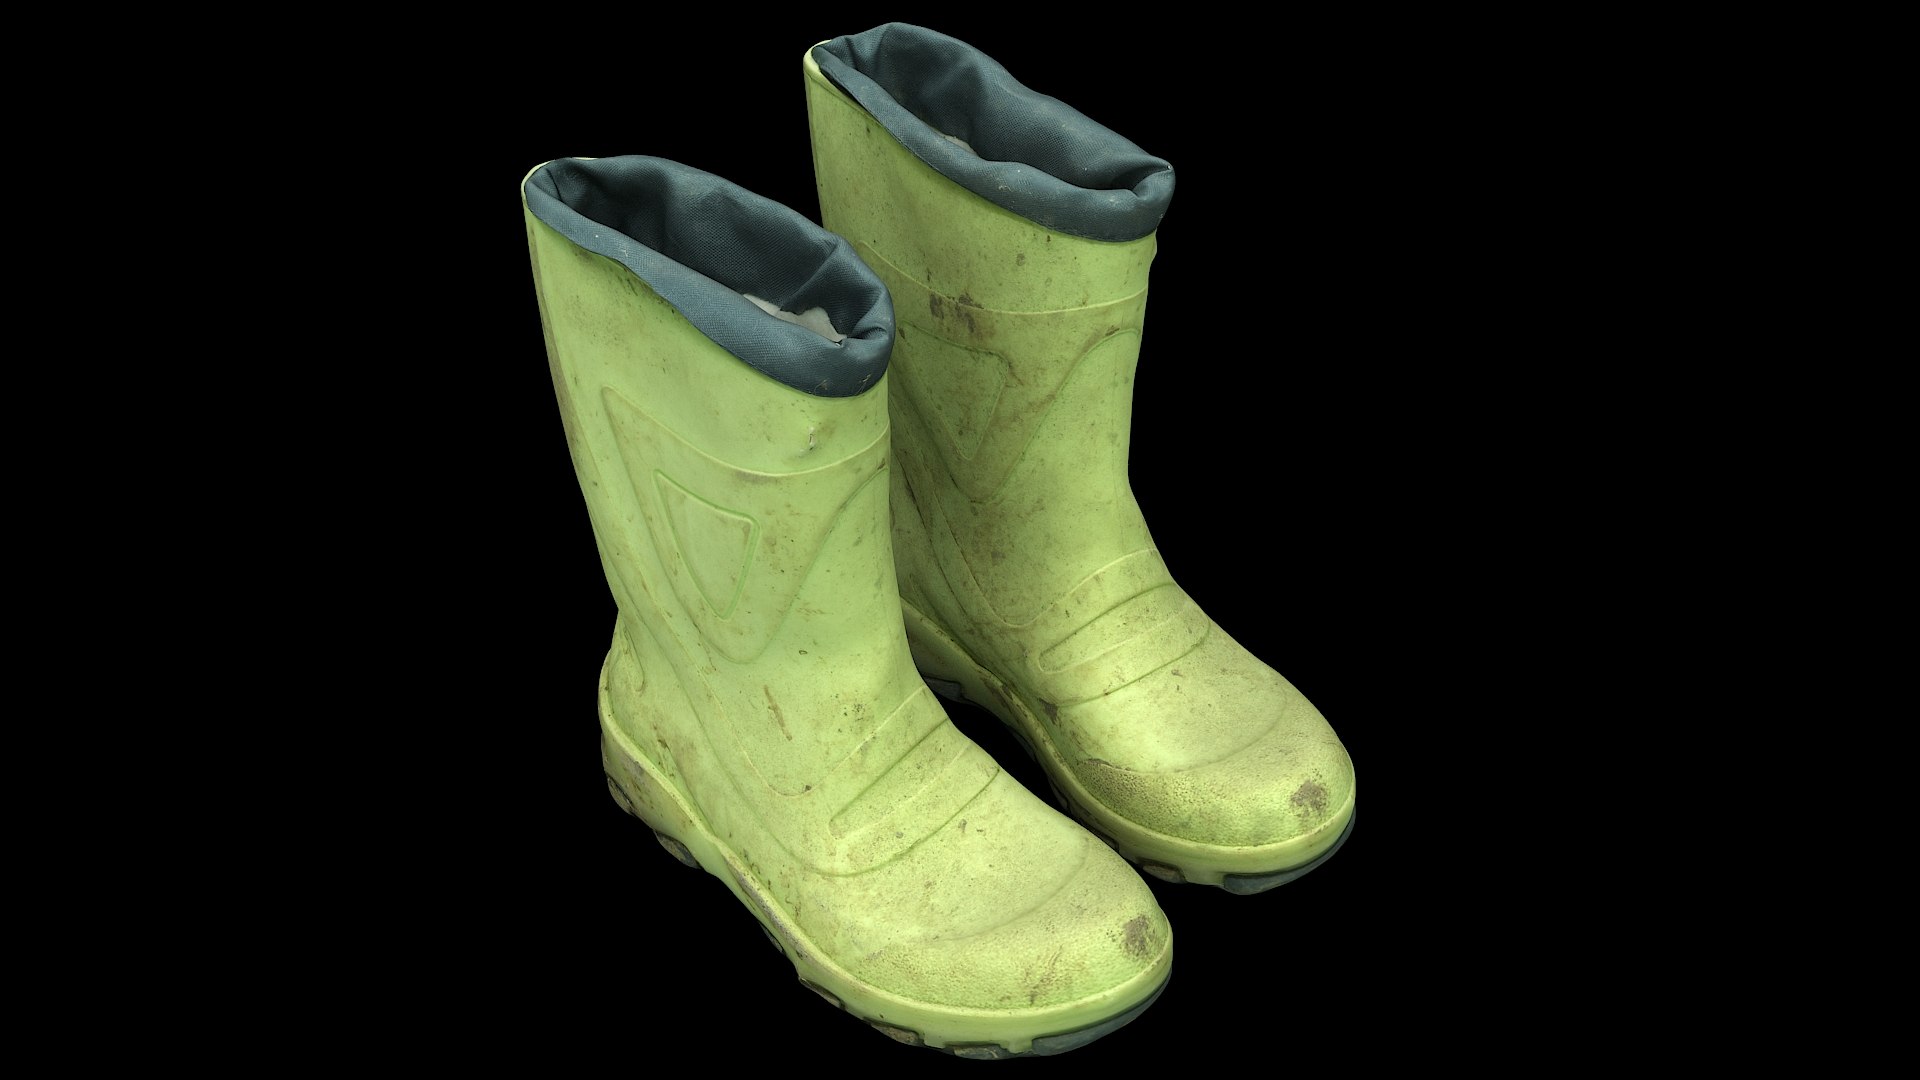 Dirty Rubber Boots 3D Model - TurboSquid 1580902